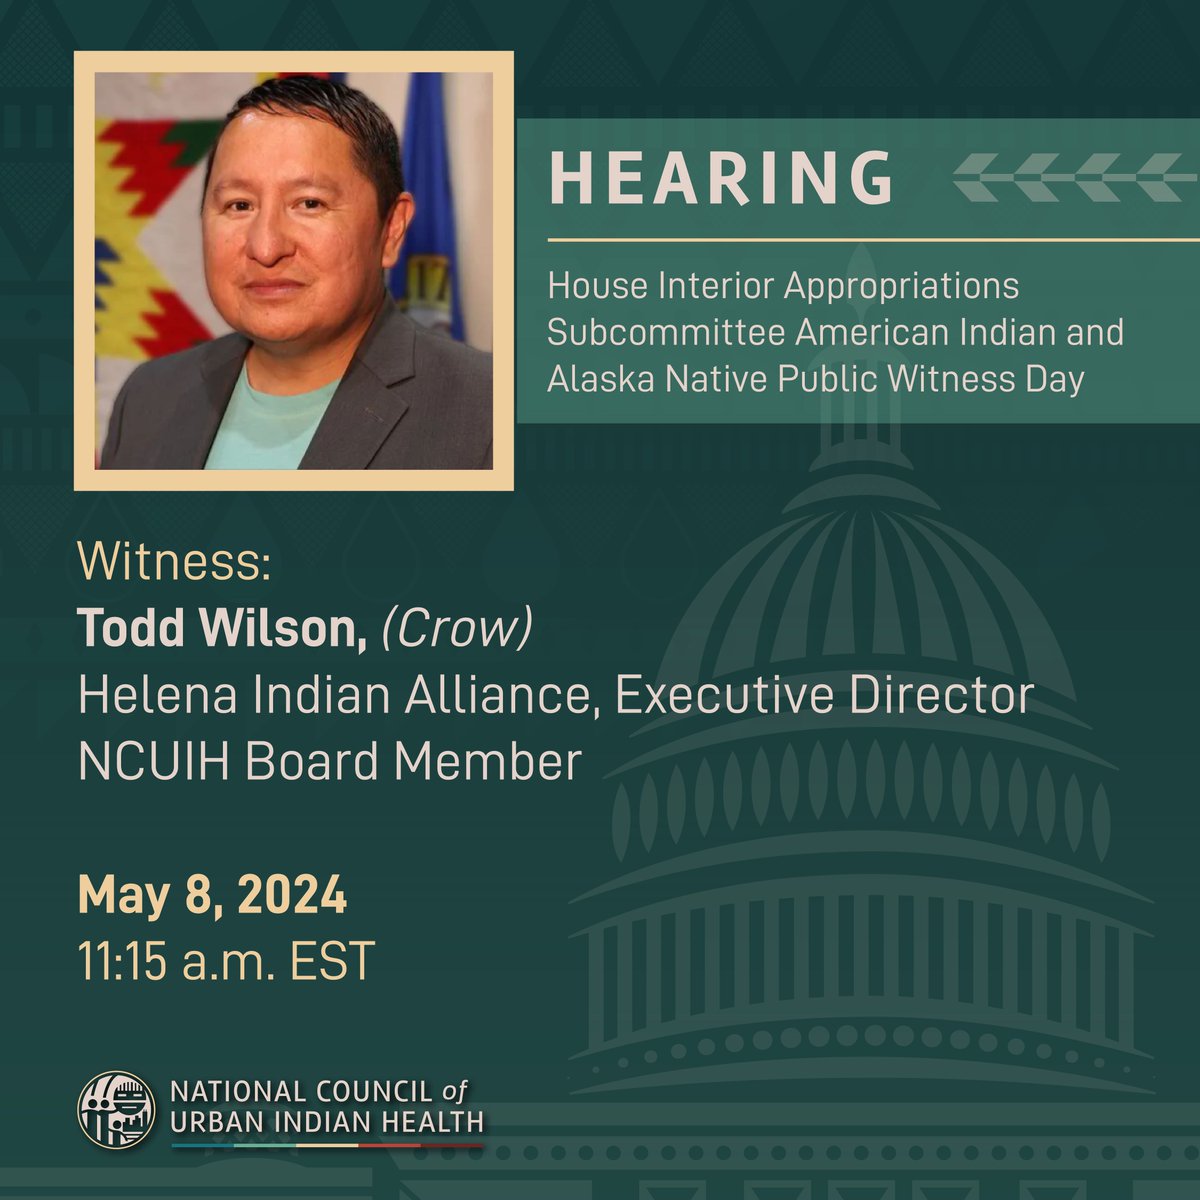 🏥💪 Advocacy in Action! Tomorrow, watch Todd Wilson of Helena Indian Alliance & NCUIH board member make a powerful case for the funding needs of Urban Indian Health Programs. Tune in at 11:15 AM EST! 🔗 buff.ly/4btkz04